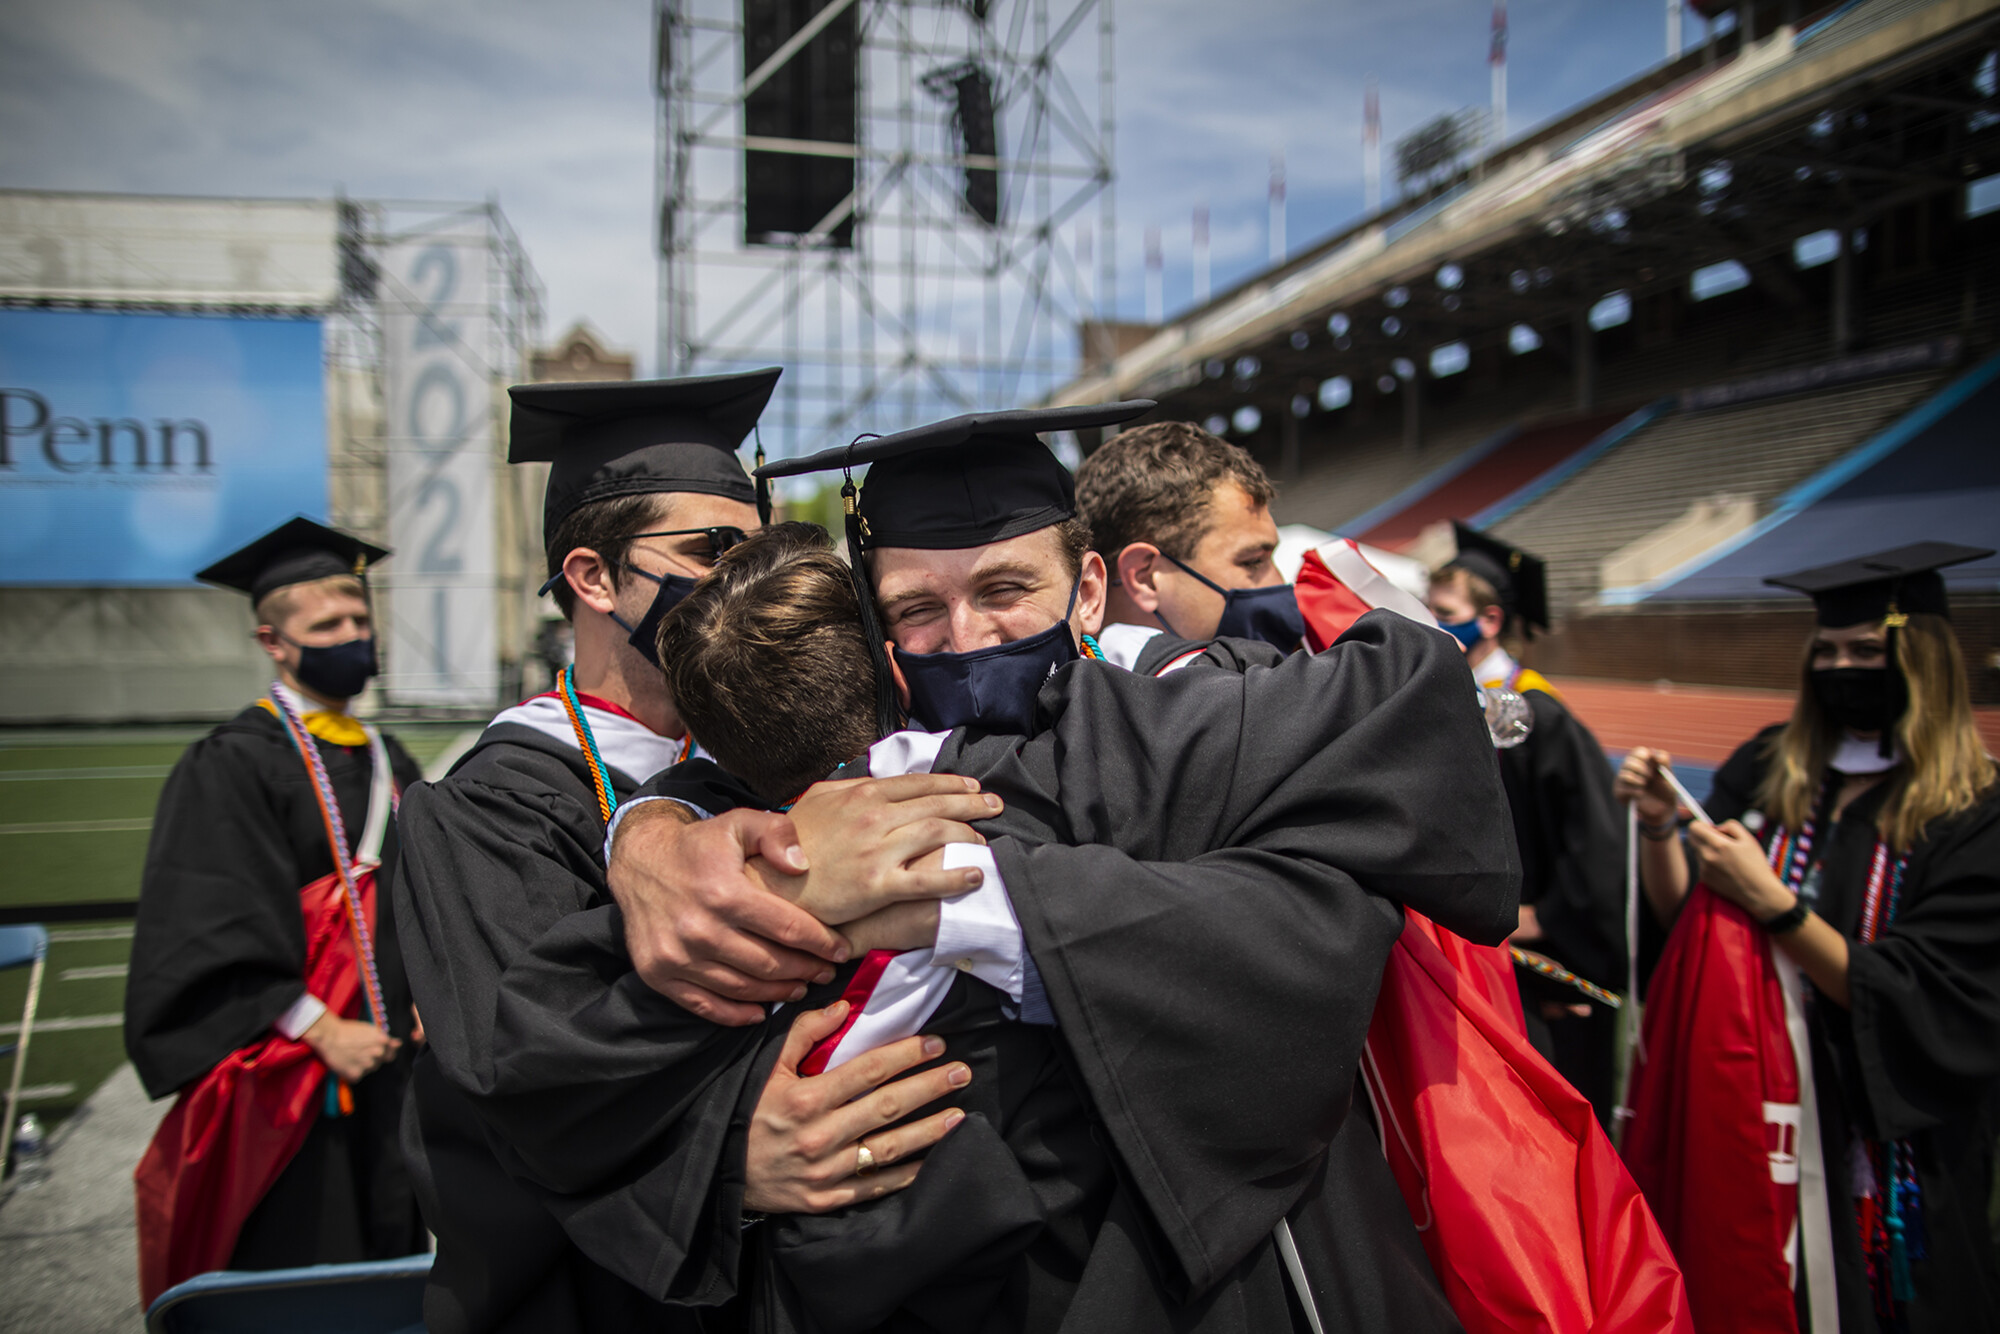 graduates hugging at end of ceremony